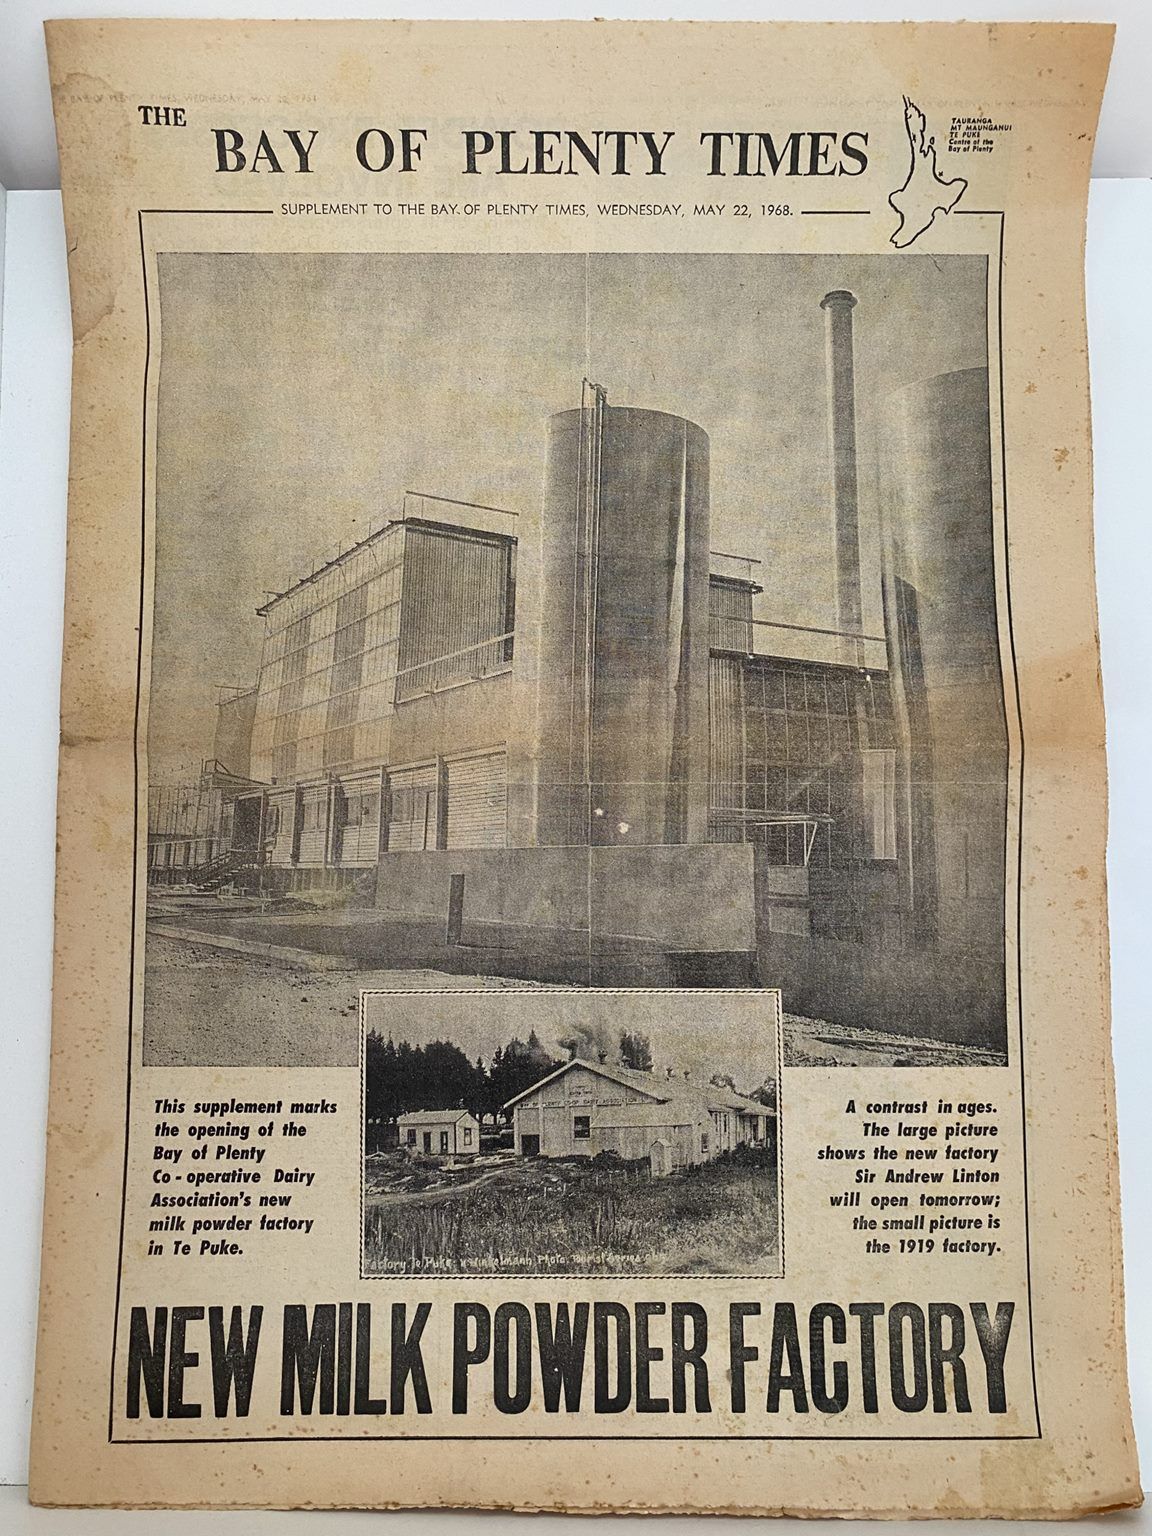 OLD NEWSPAPER: The Bay of Plenty Times - Dairy Factory Opening 1968